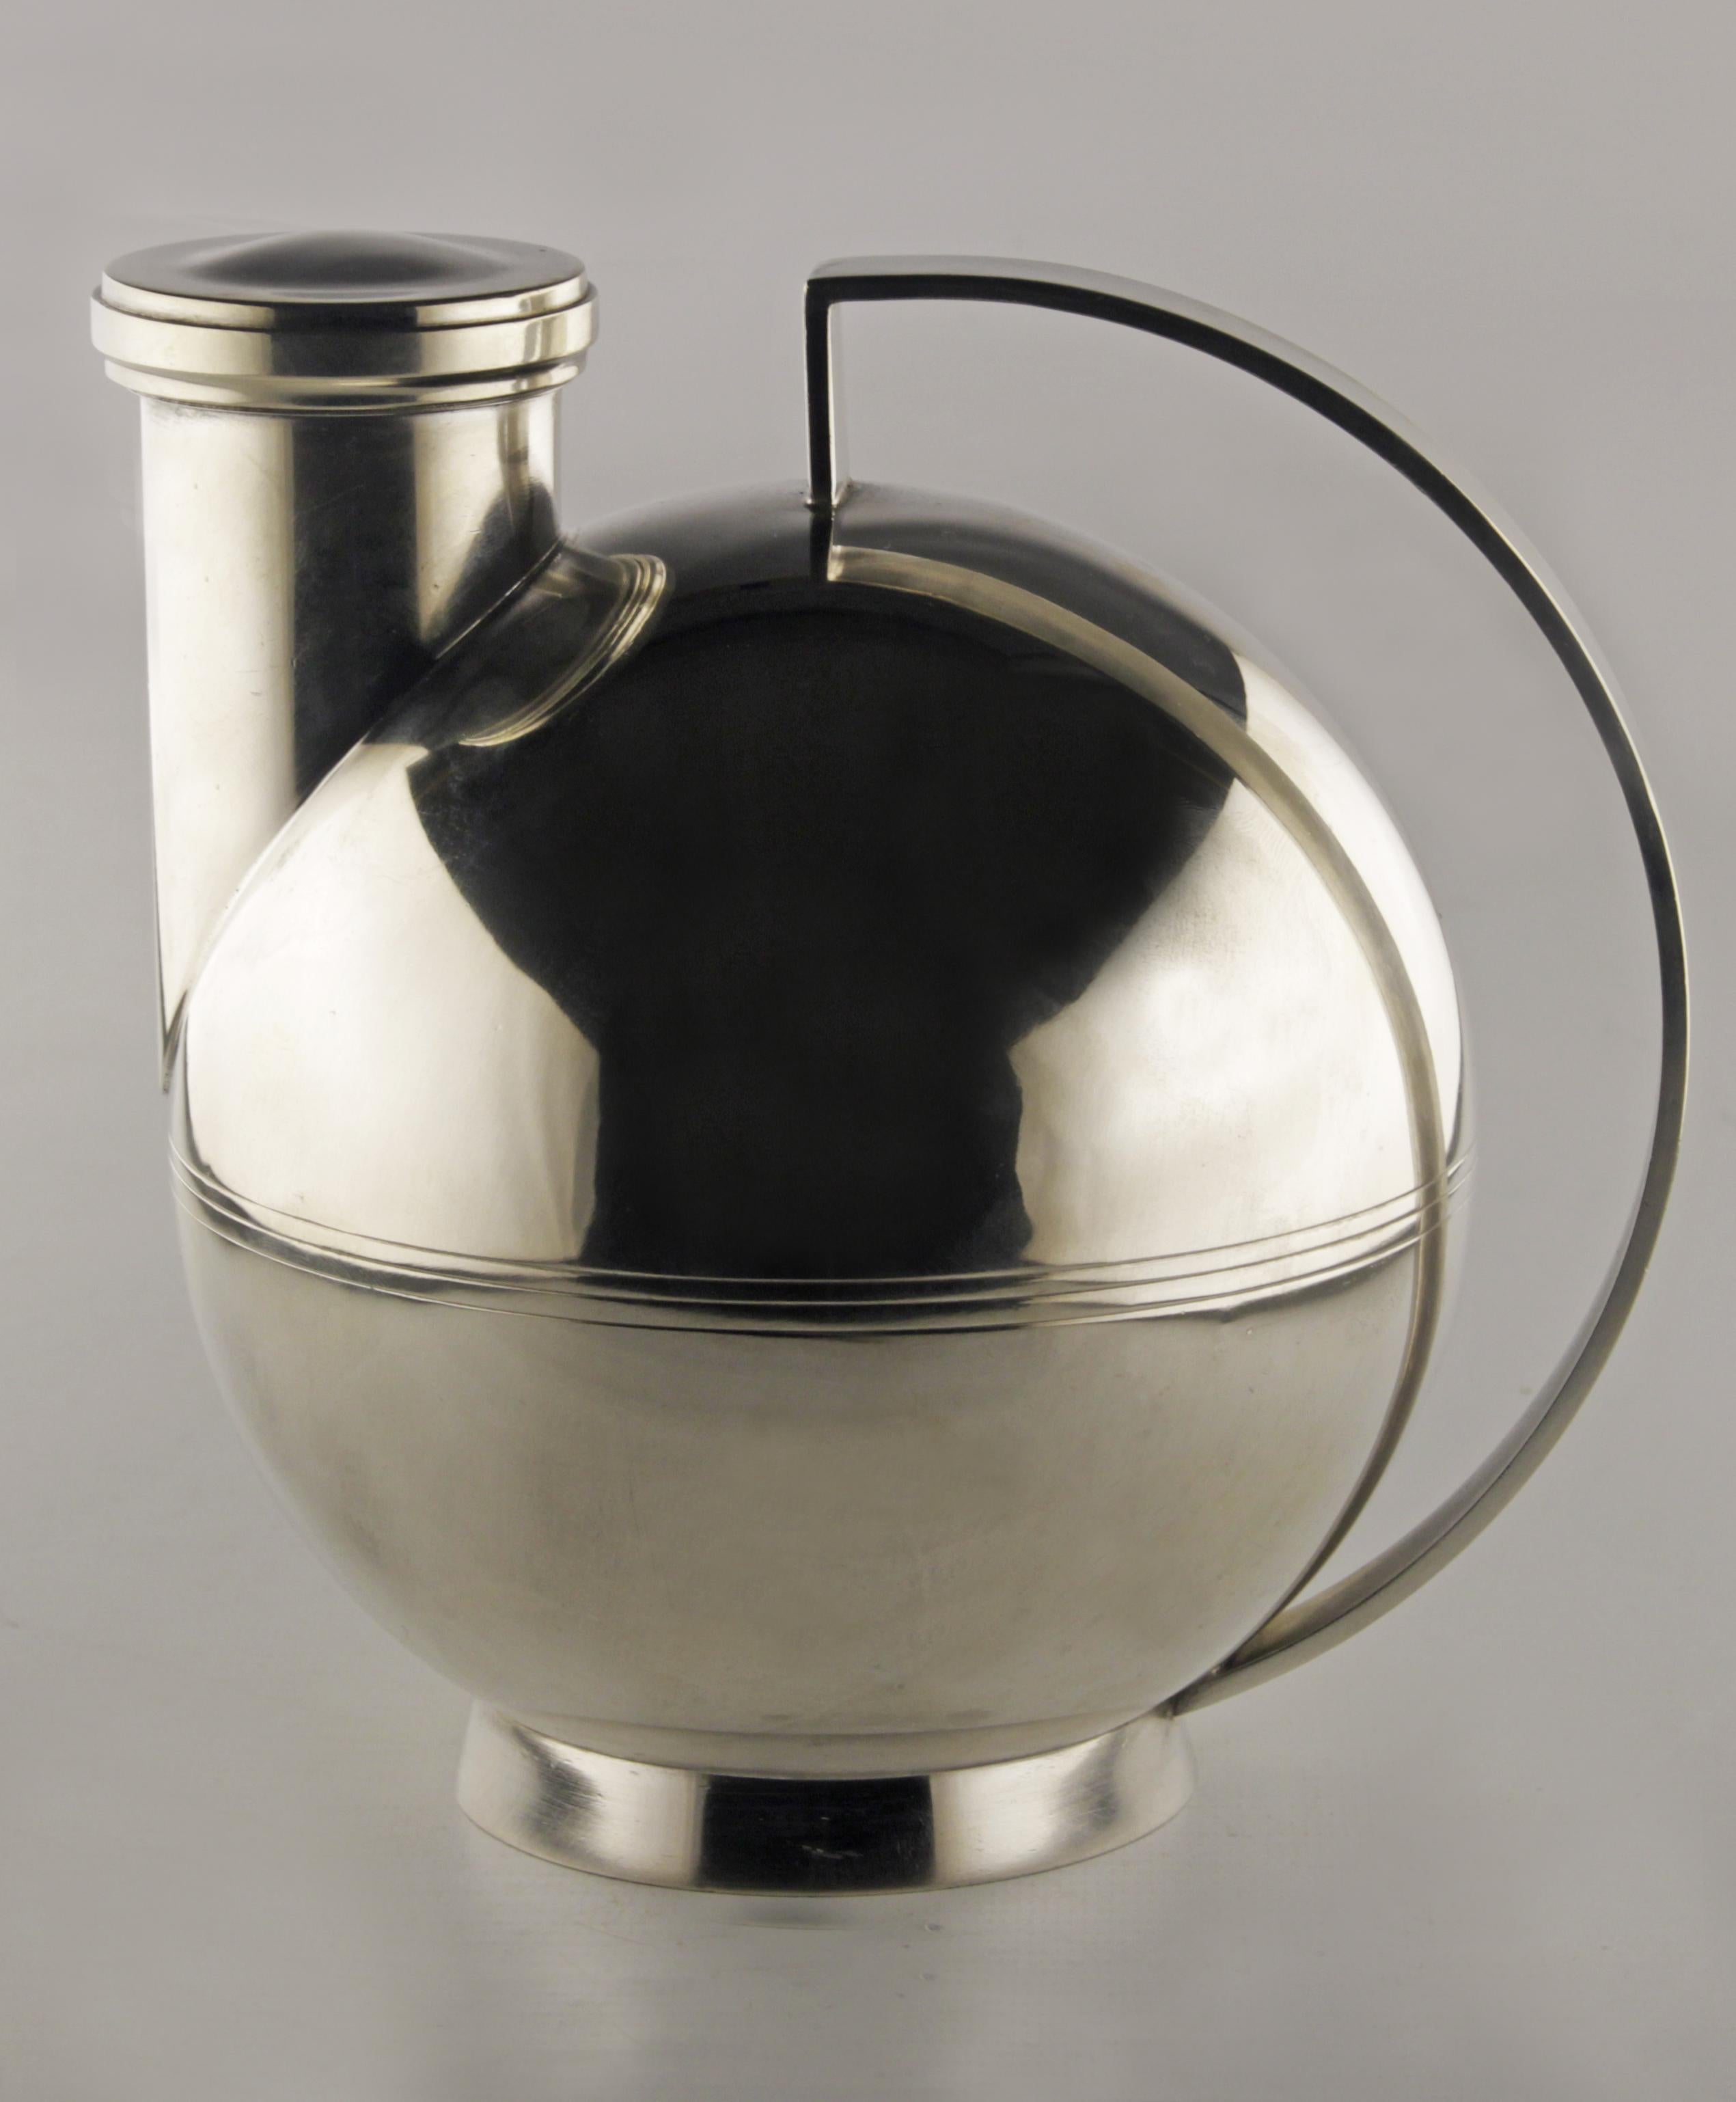 Art Déco/Modernist silver spherical cocktail shaker with applied handle and spout, stamped marks to the underside, by swedish designer Sylvia Stave

By: Sylvia Stave
Material: silver, silver plae
Technique: metalwork, polished, cast, molded,